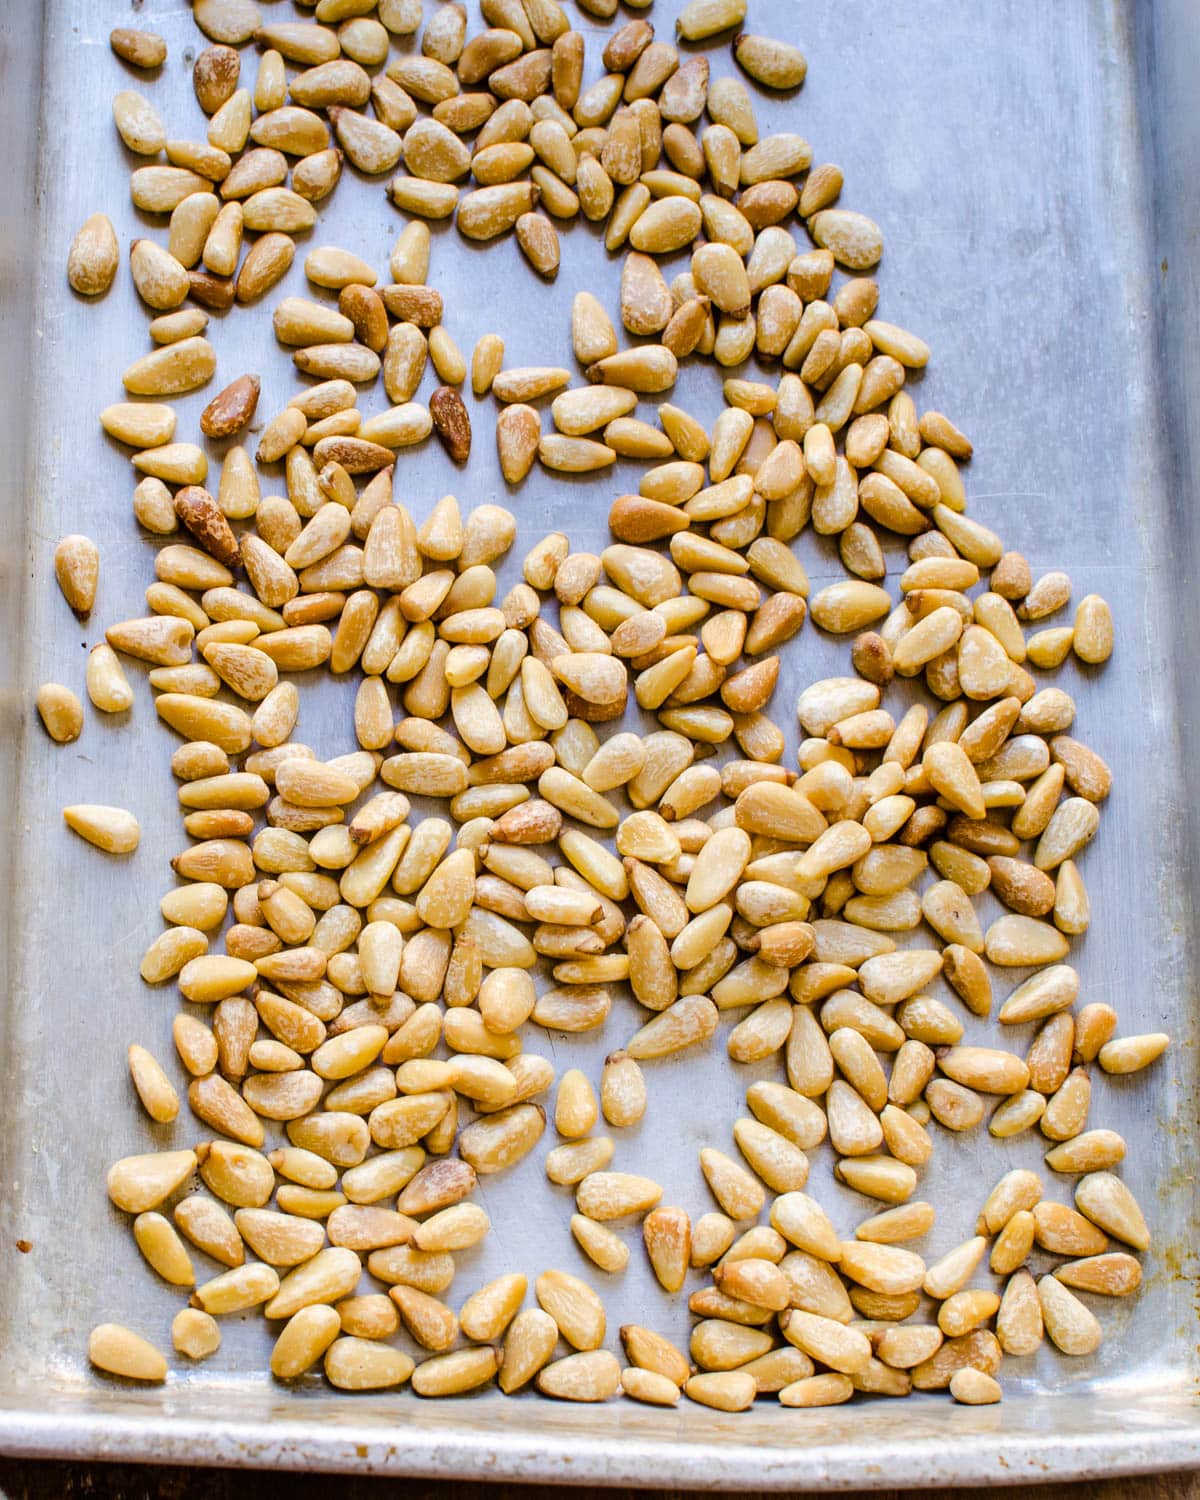 I am toasting Pine Nuts on a sheet pan.